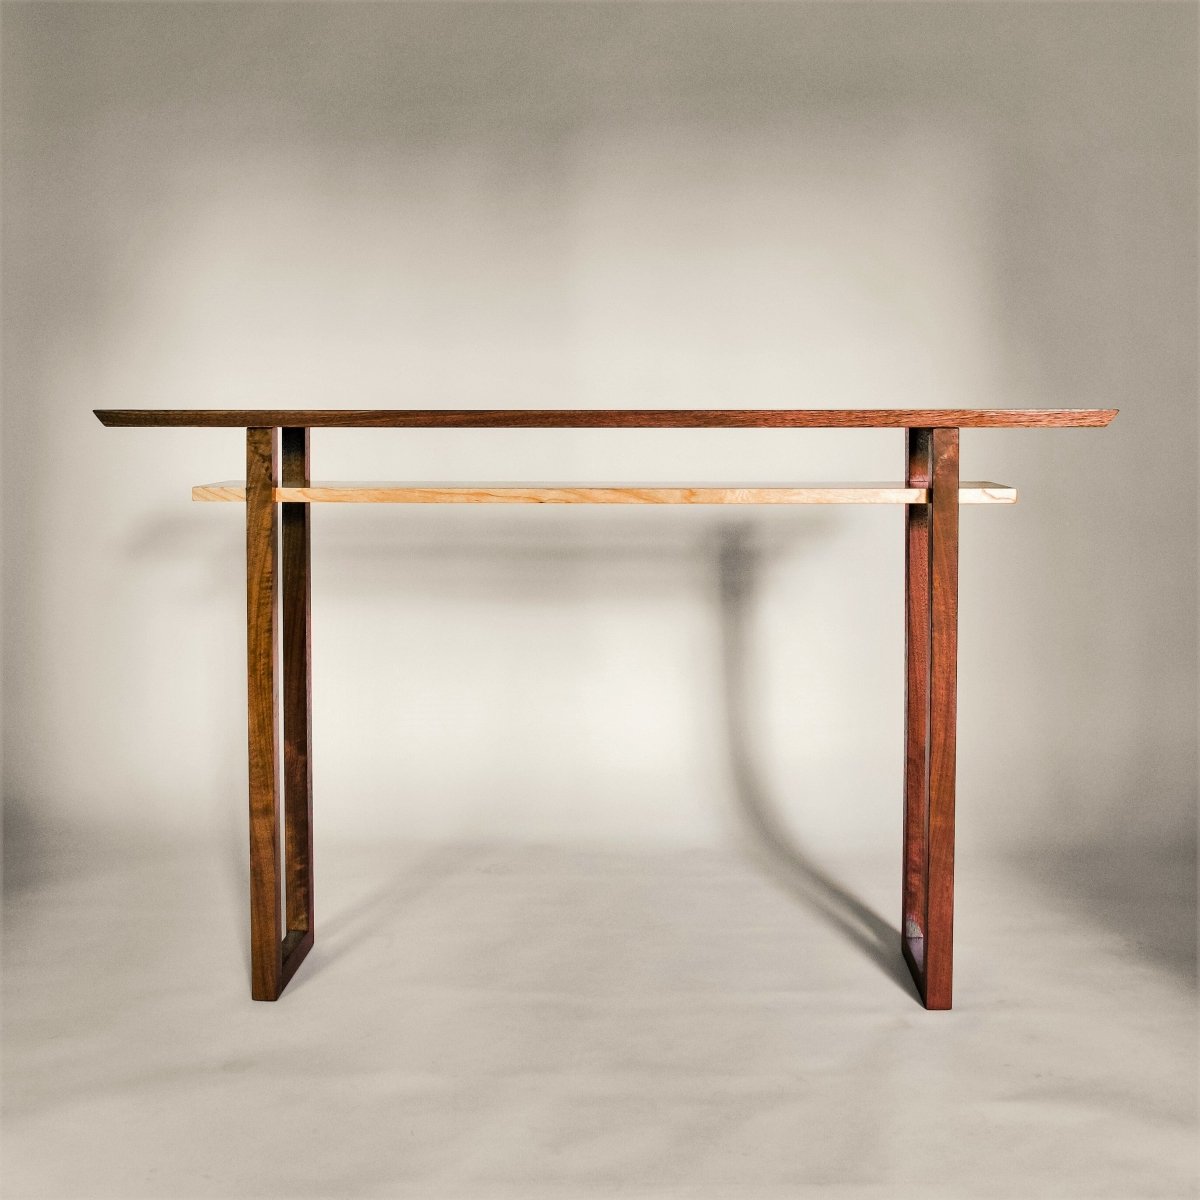 Modern wood console table in traditional wood tones of walnut and cherry